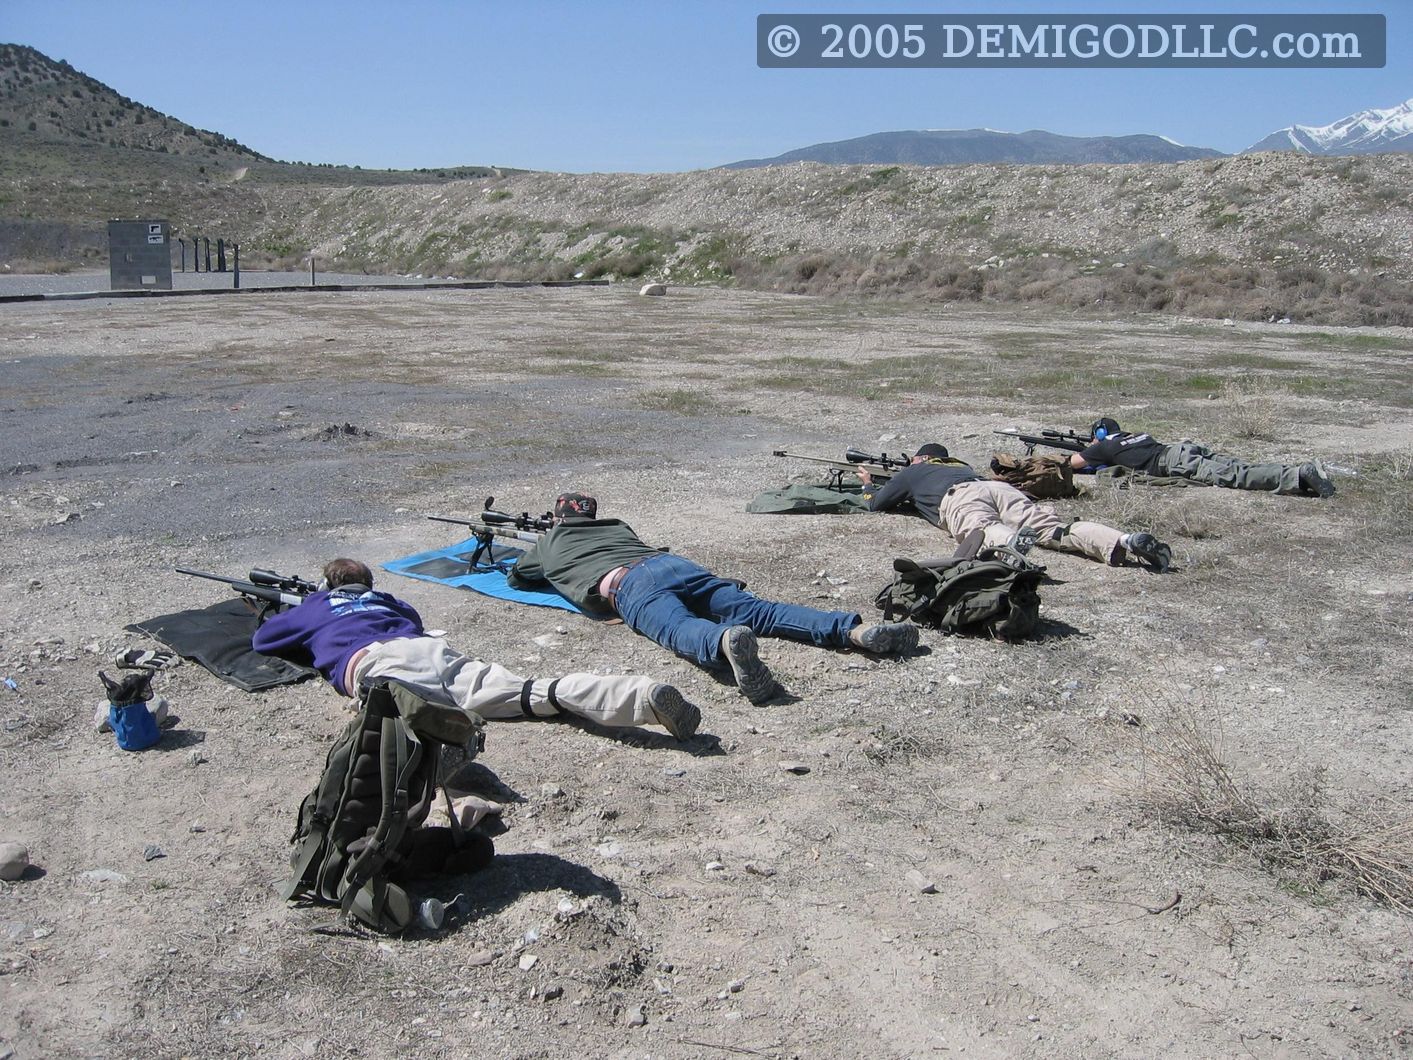 2005 Snipers' Paradise Sniper Challenge - West, F.A.R.M. SLC, UT
, photo 